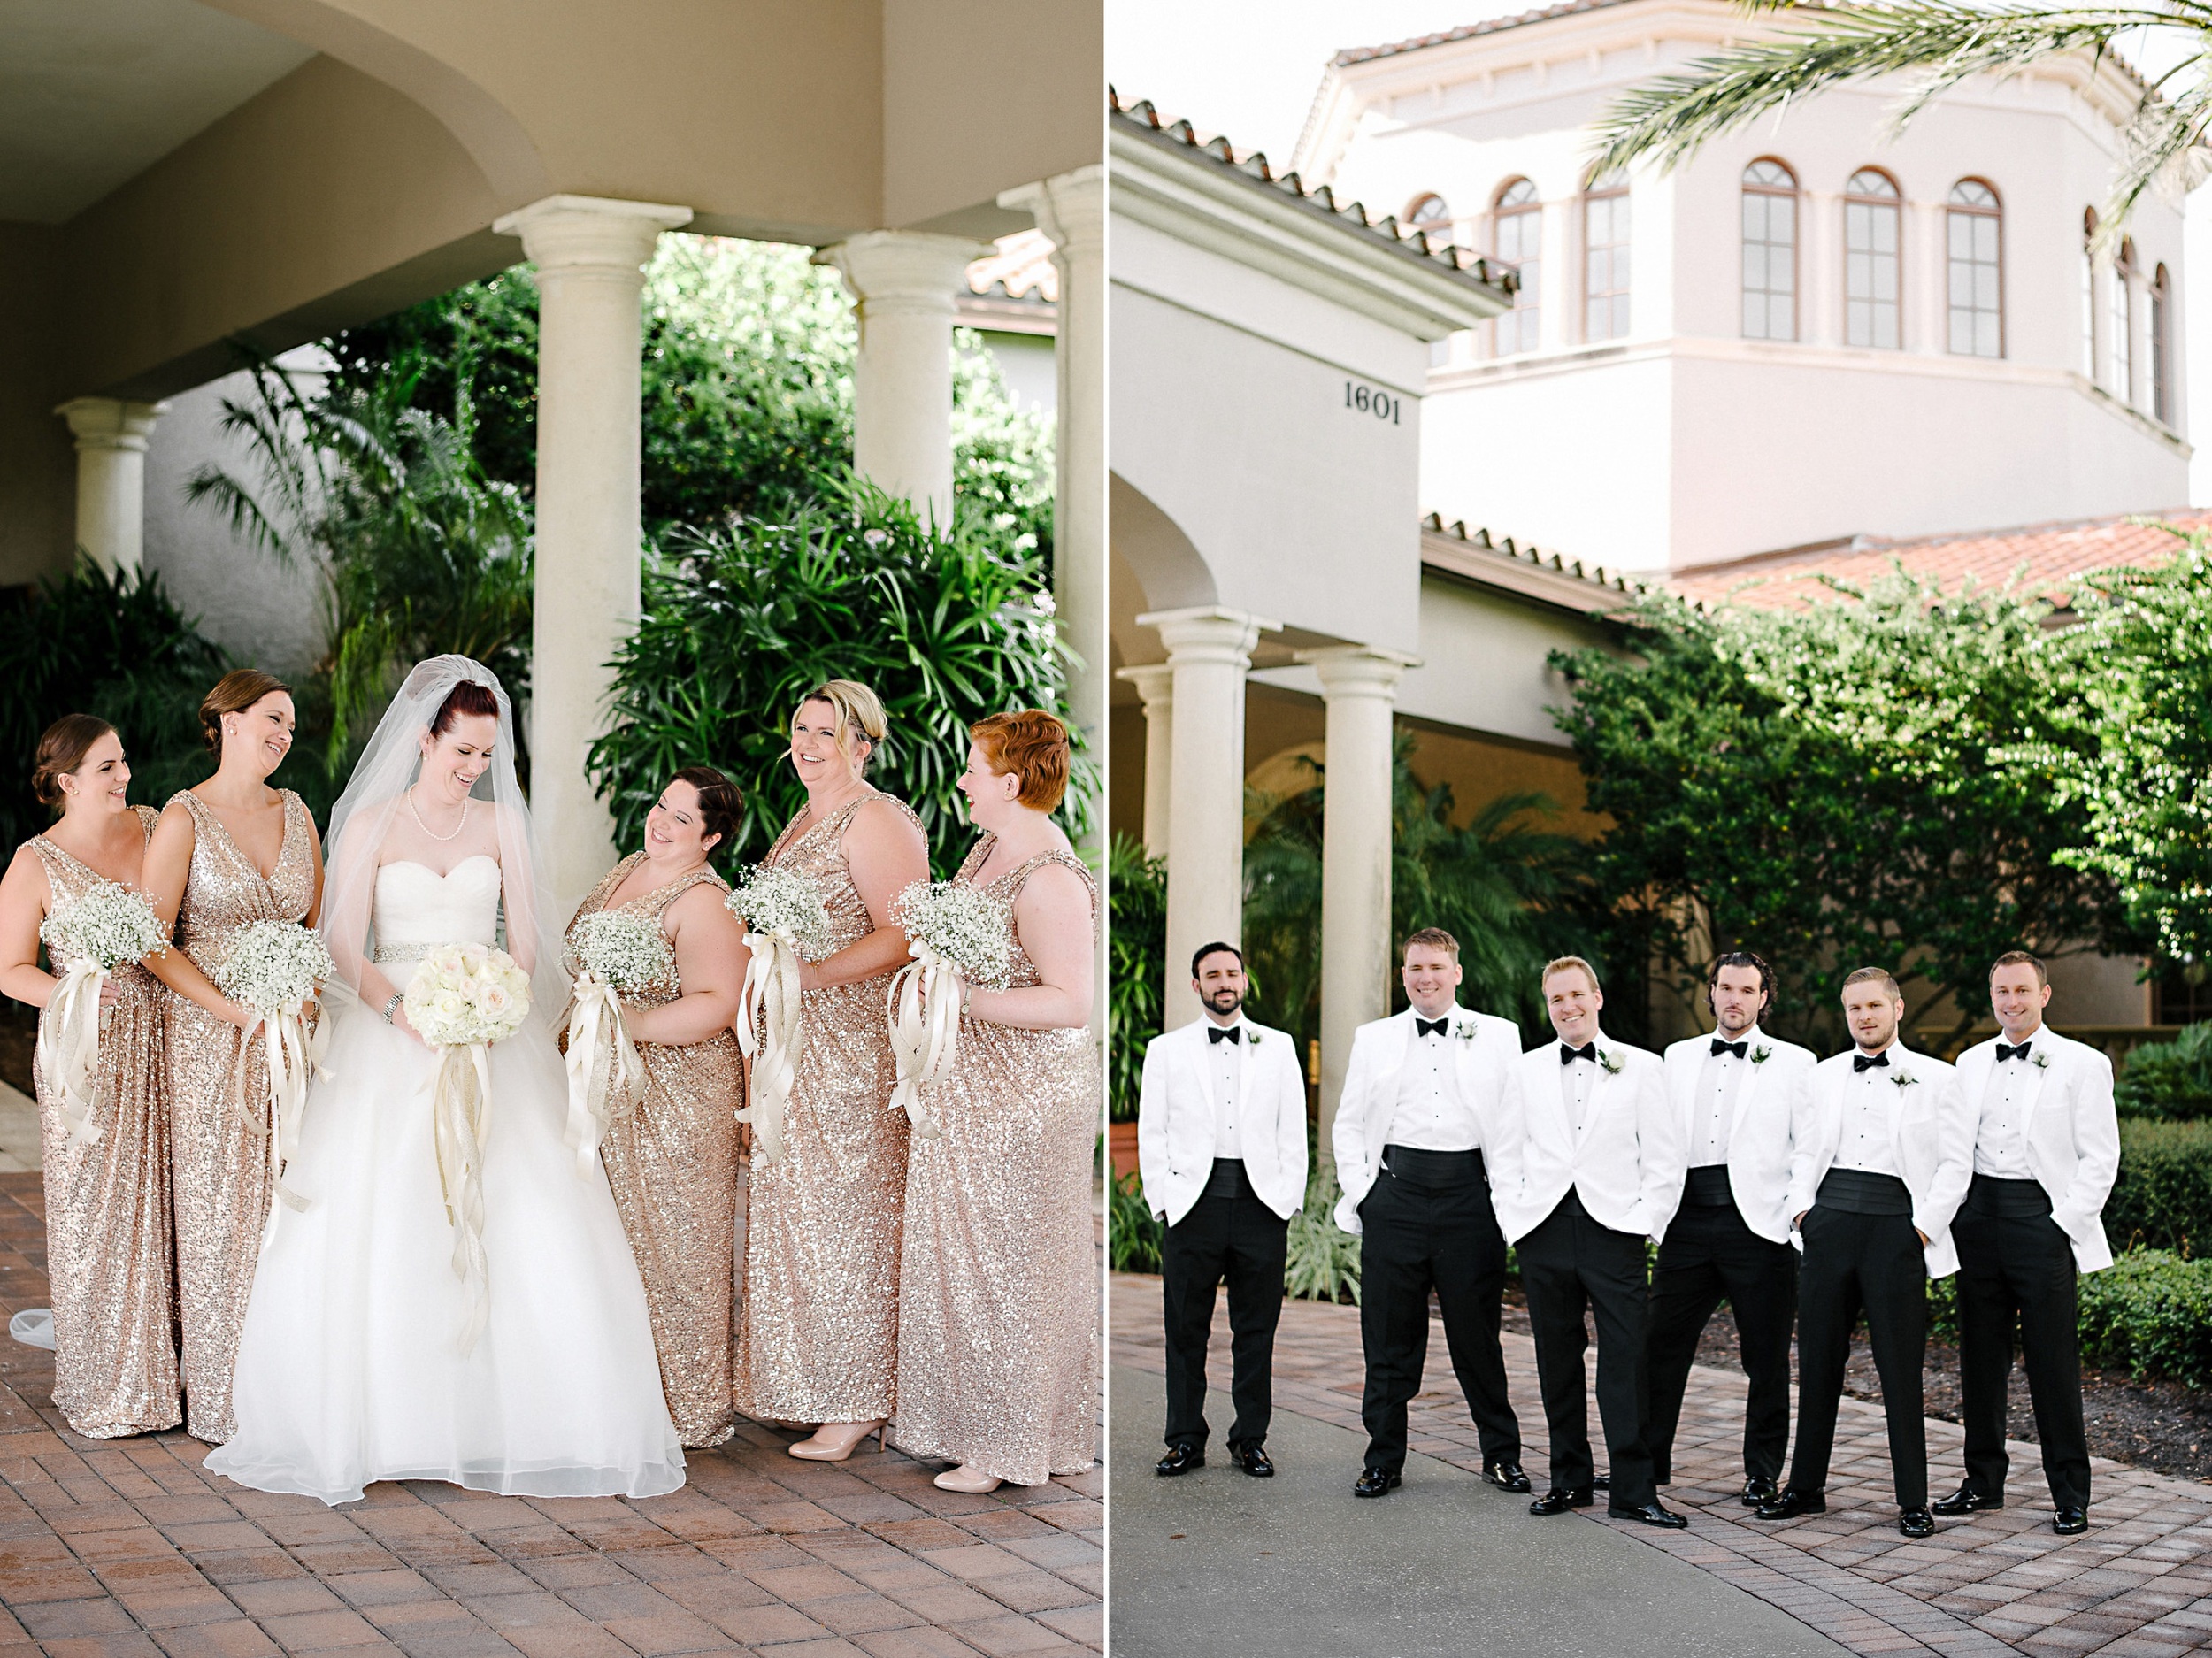 bridesmaidss in floor length rose gold sequin dresses and groomsmen in white dinner jackets